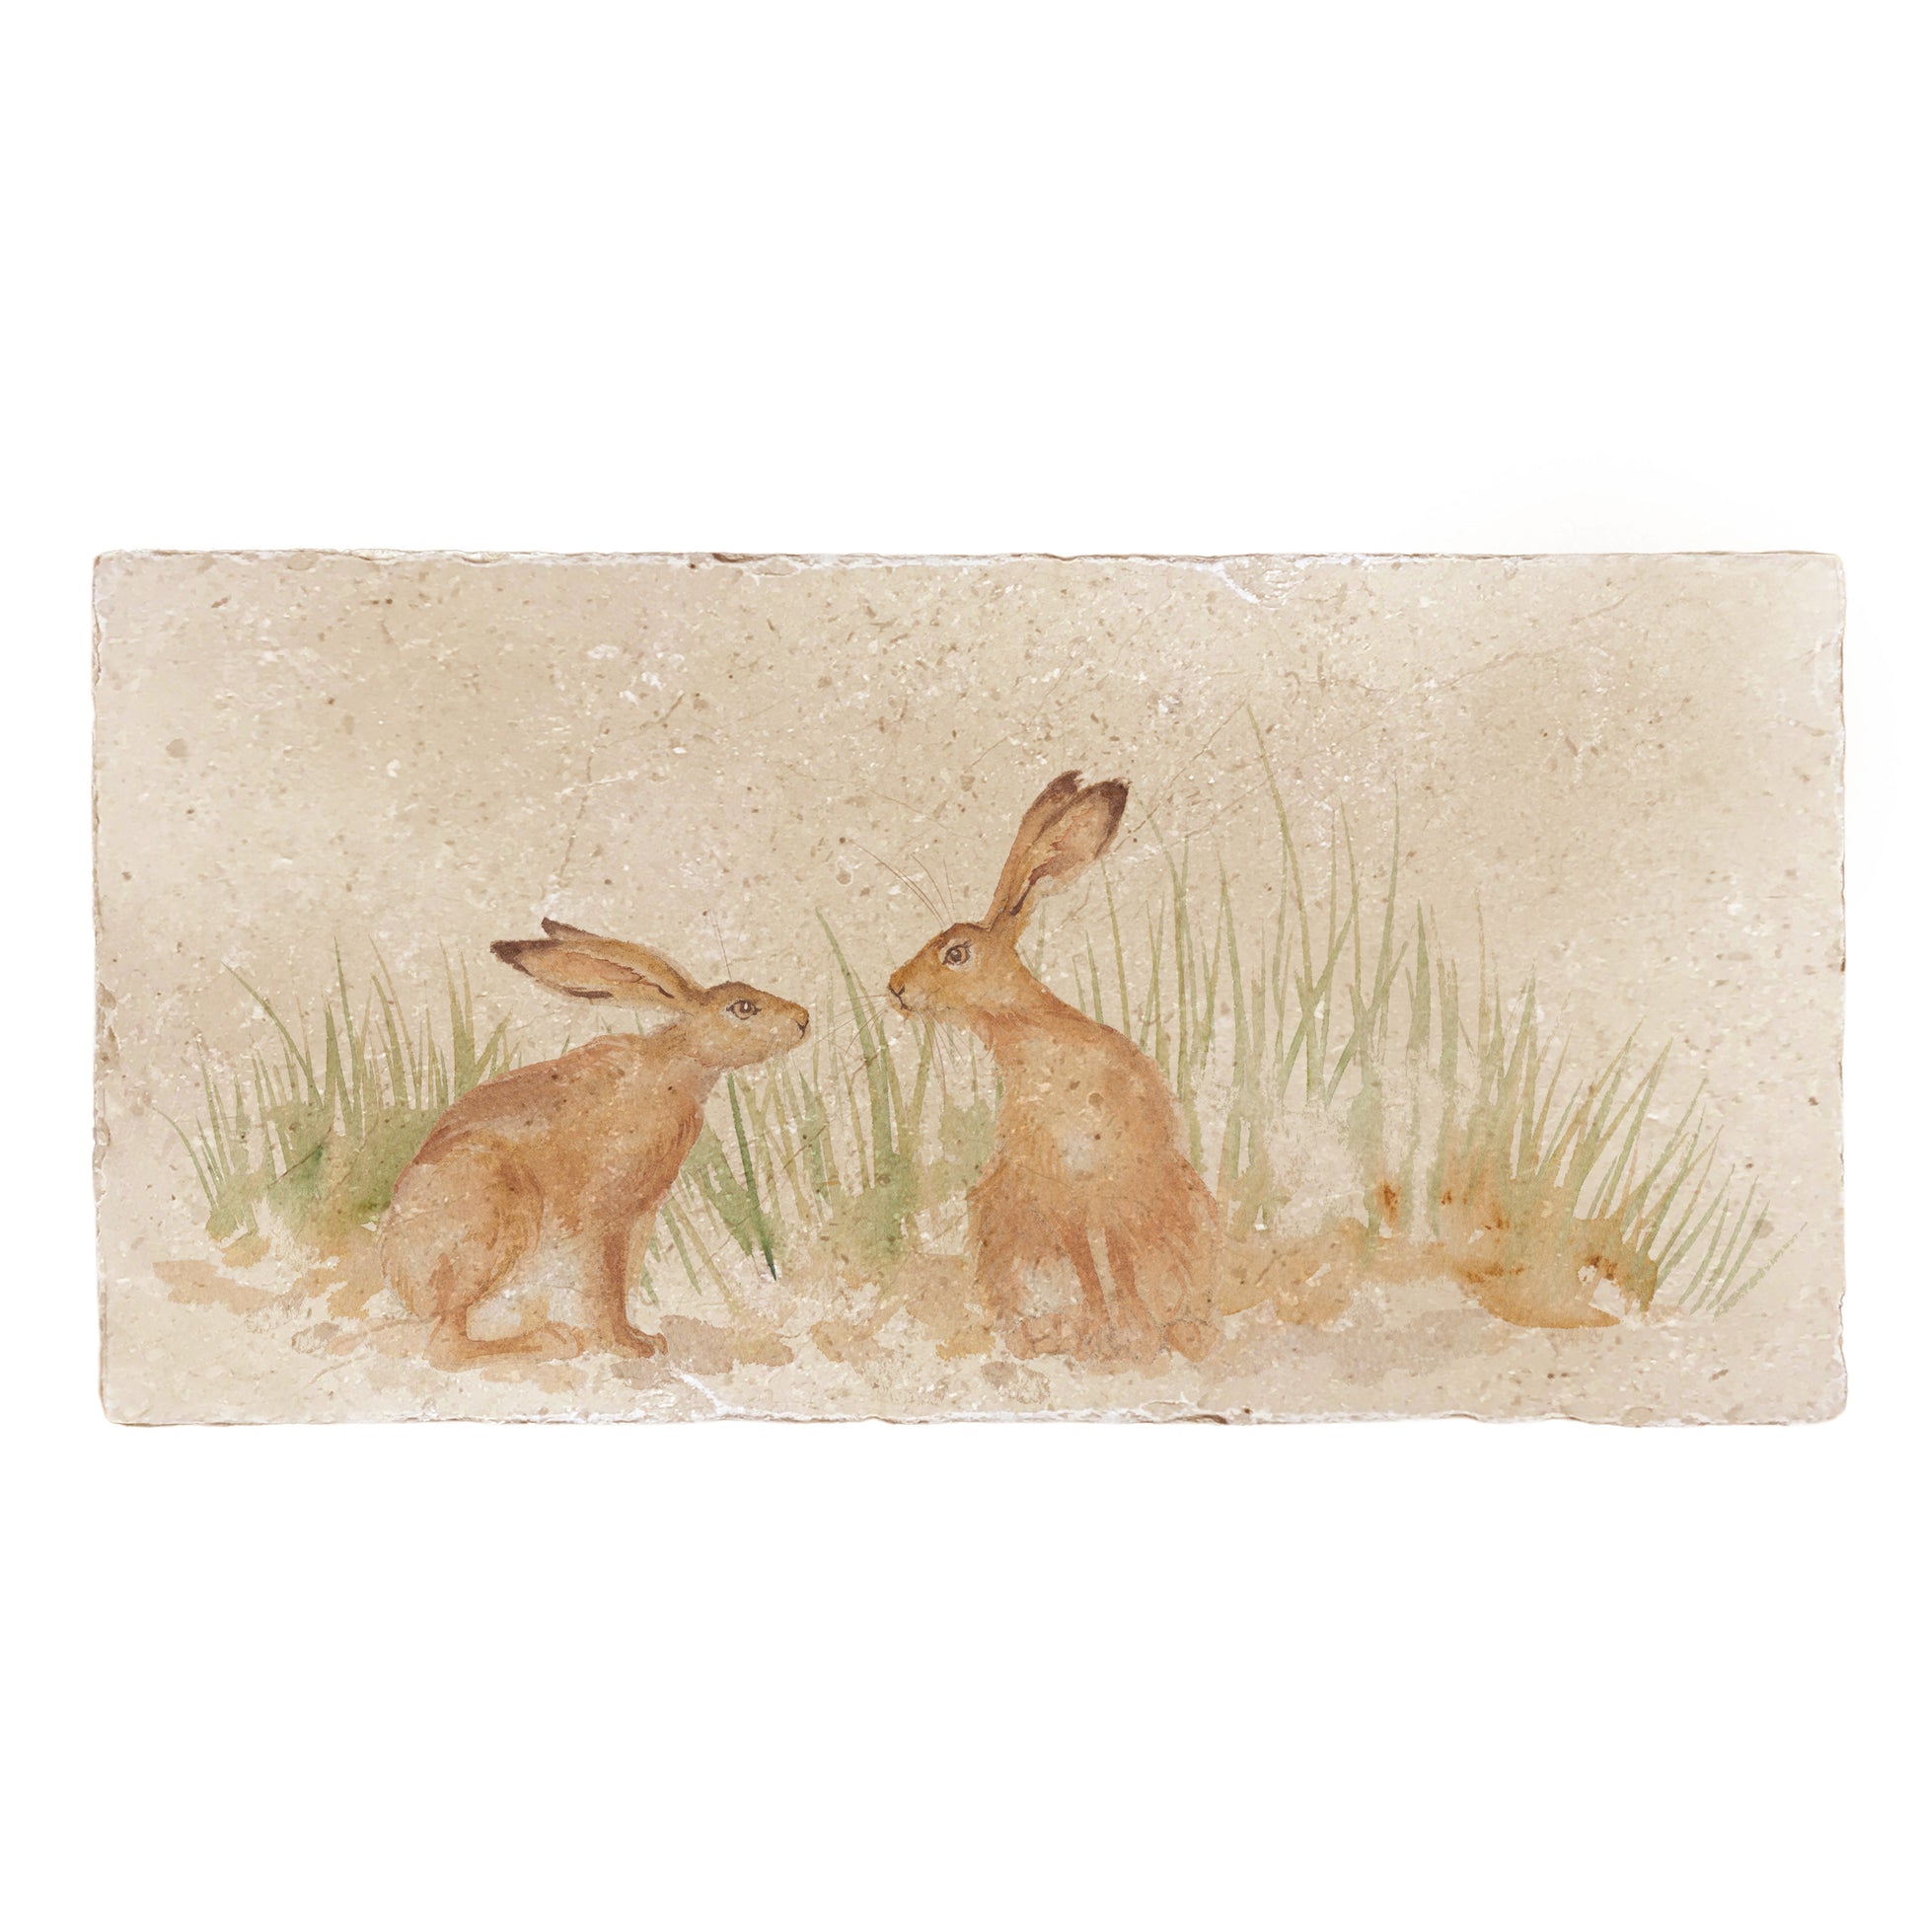 A handmade rectangle cream marble splashback tile featuring a watercolour countryside animal design of two hares in grass facing each other about to touch noses.